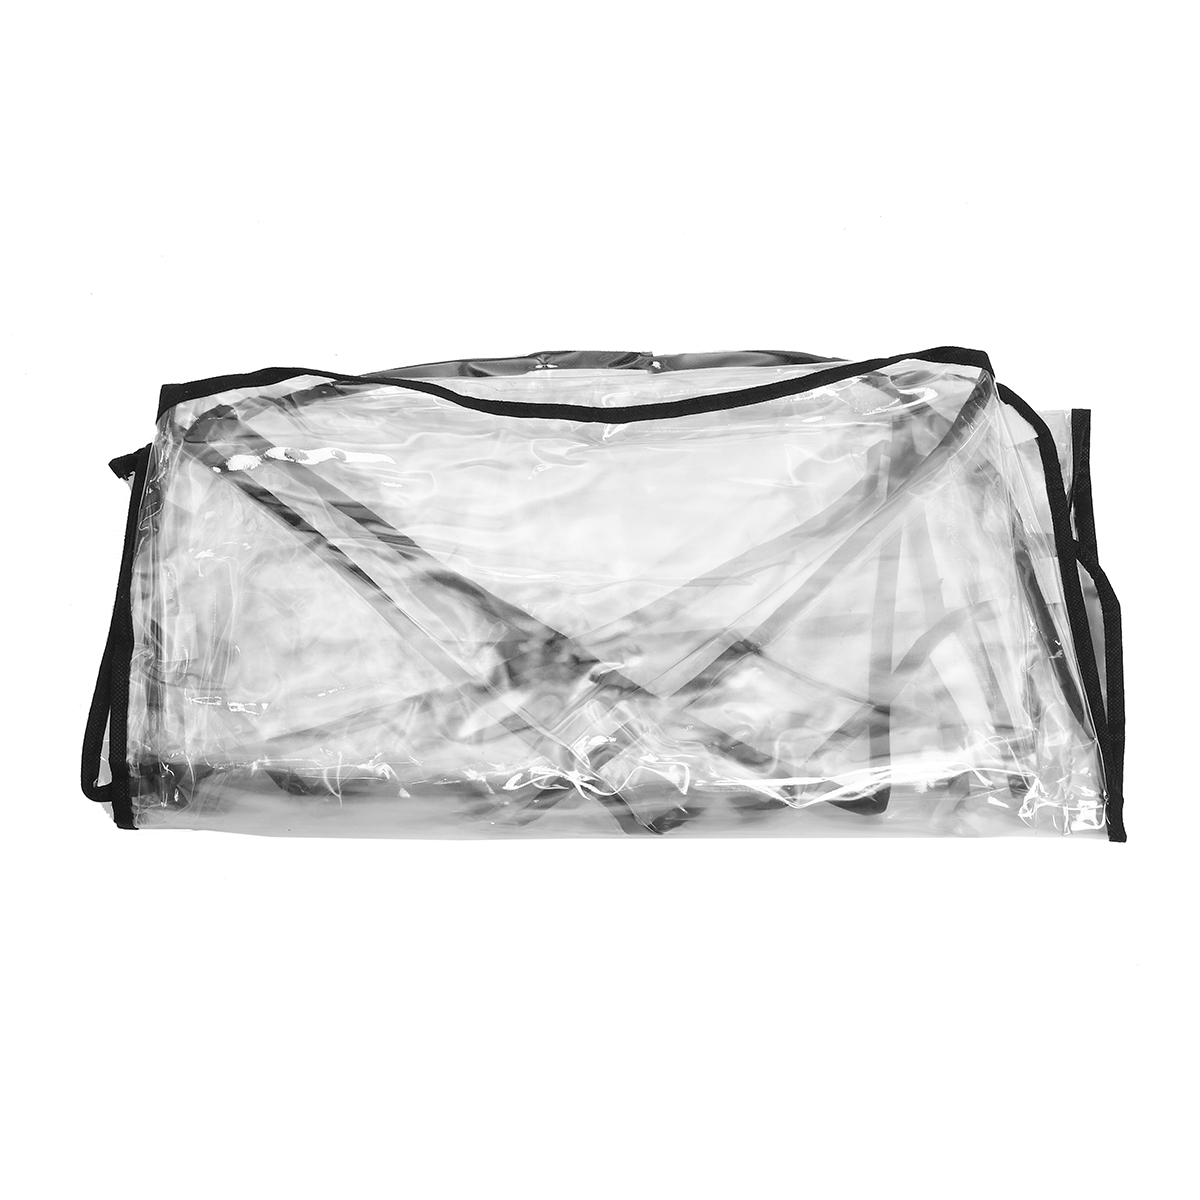 Twin-Baby-Carriage-Rain-Cover-Stroller-Infant-Prams-Transparent-Windproof-Shield-1575307